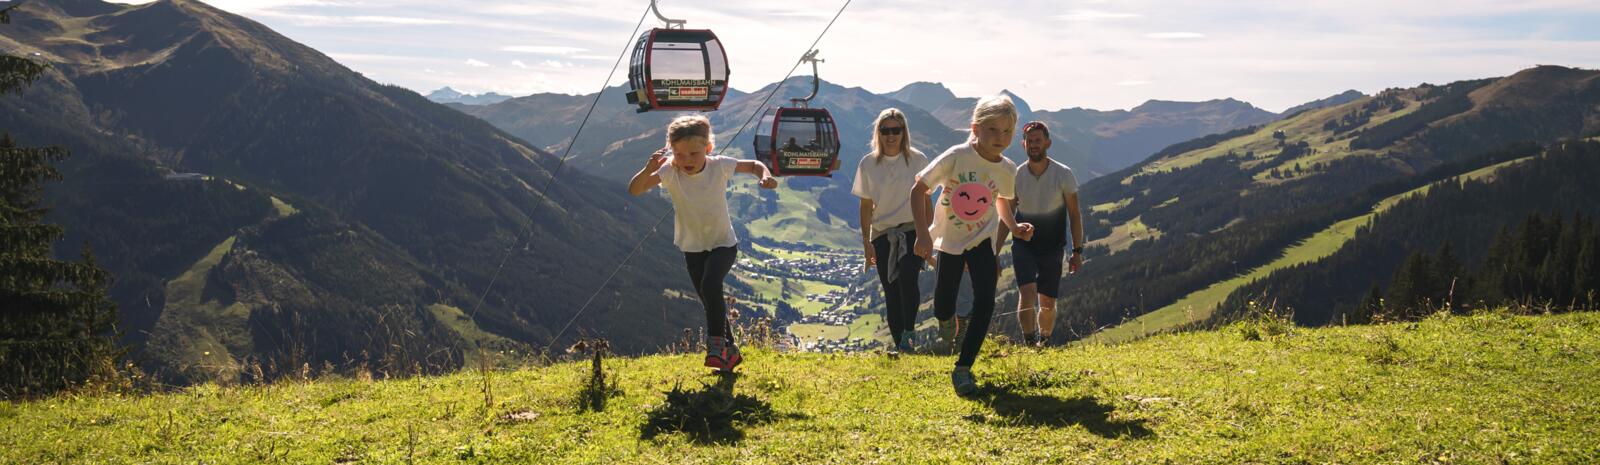 Fun for the whole family in summer in Saalbach Hinterglemm | © Klaus Listl